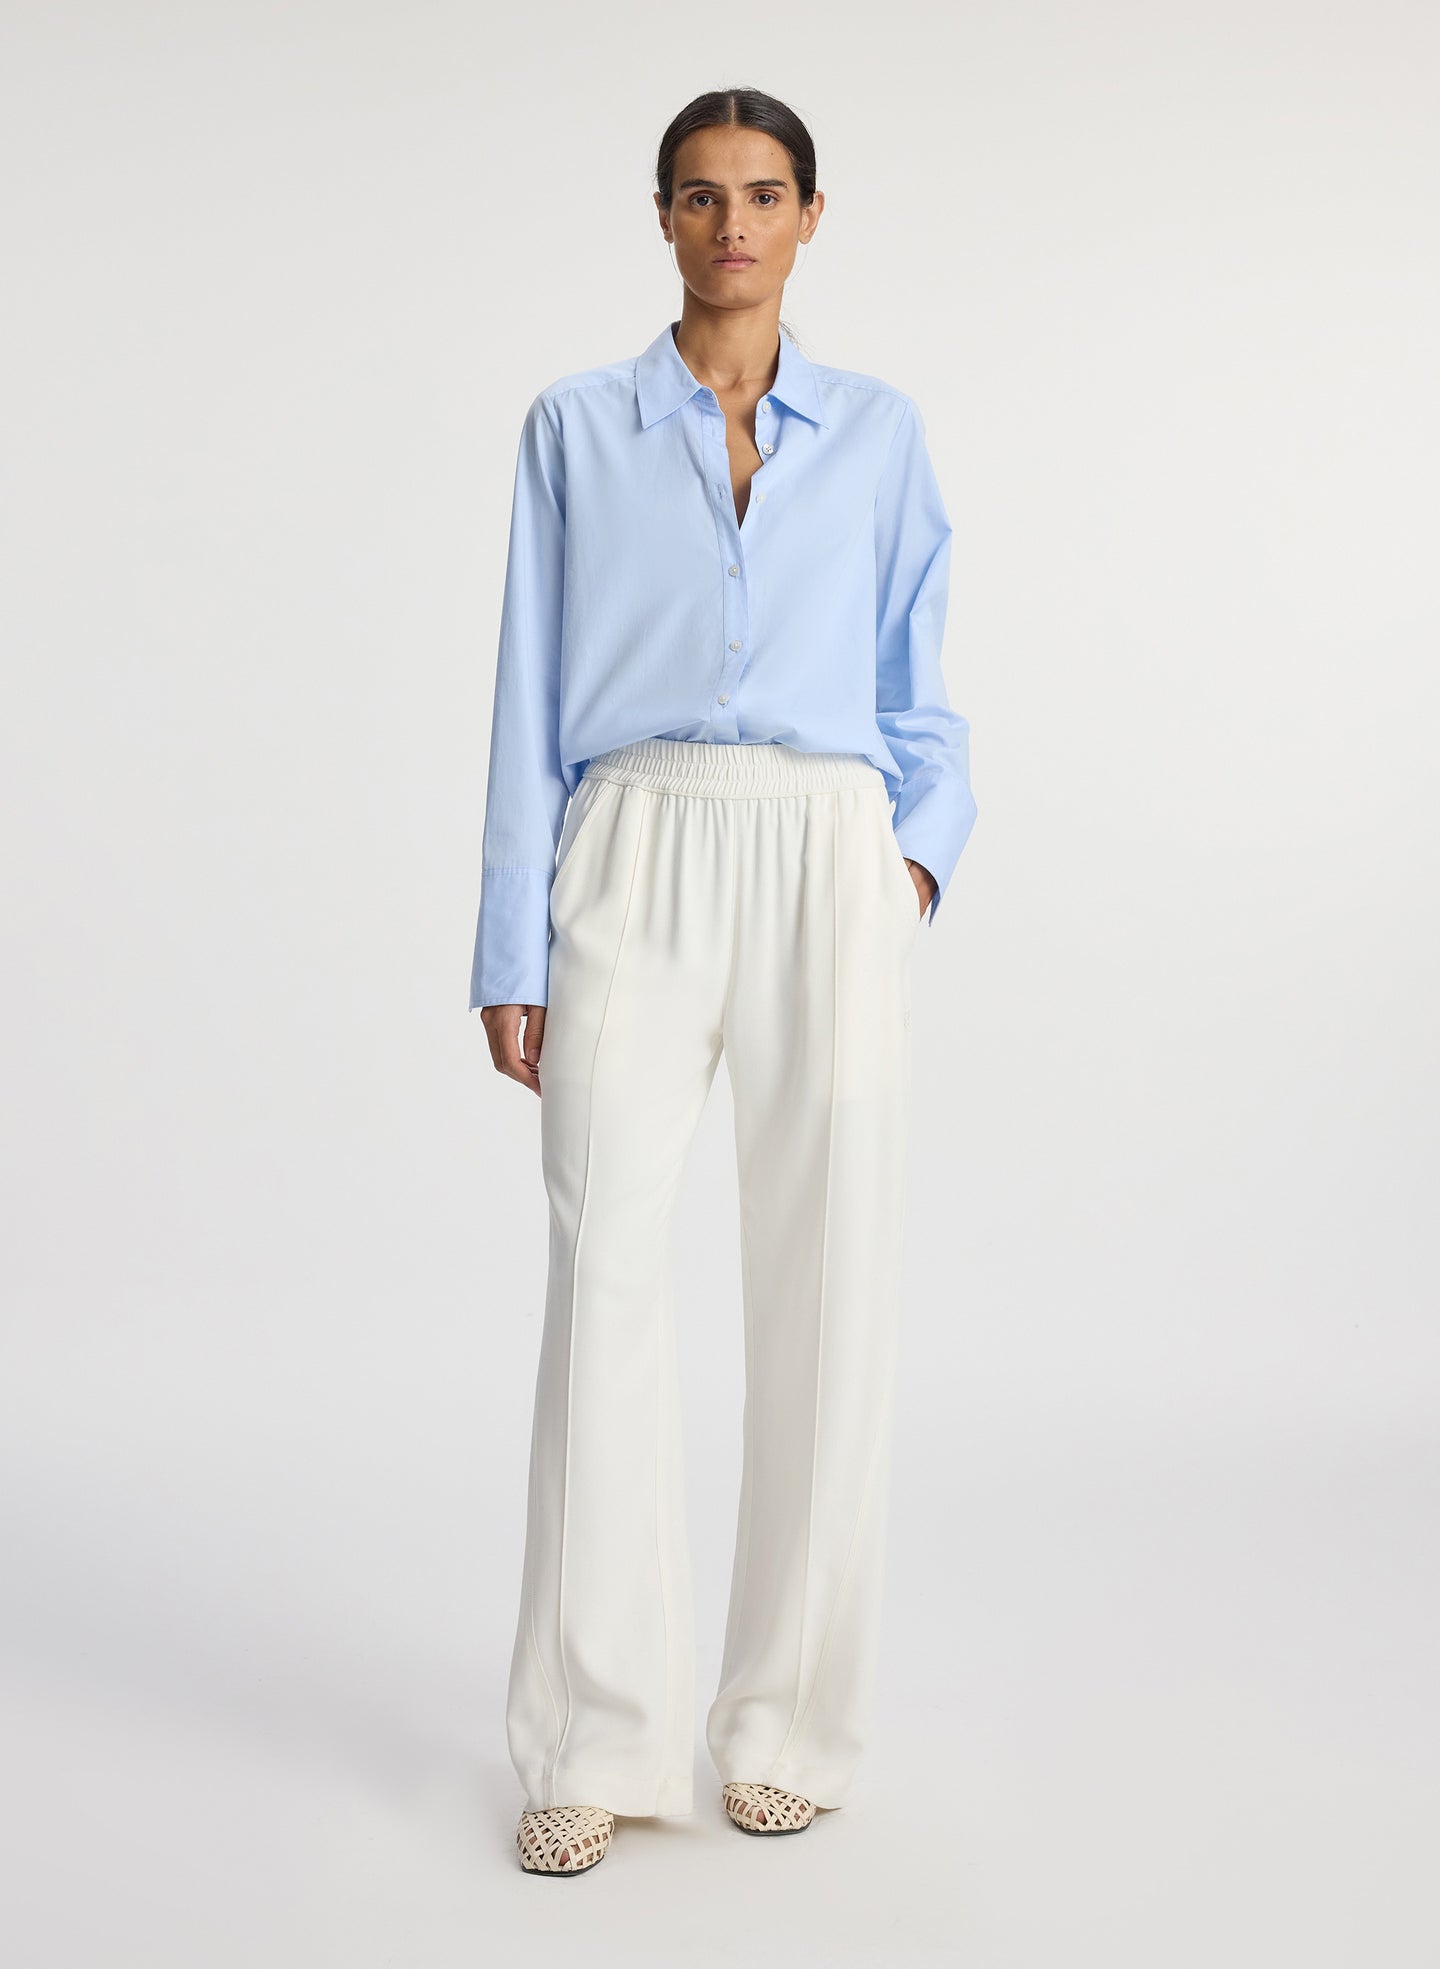 front view of woman wearing light blue button down collared shirt and white pants